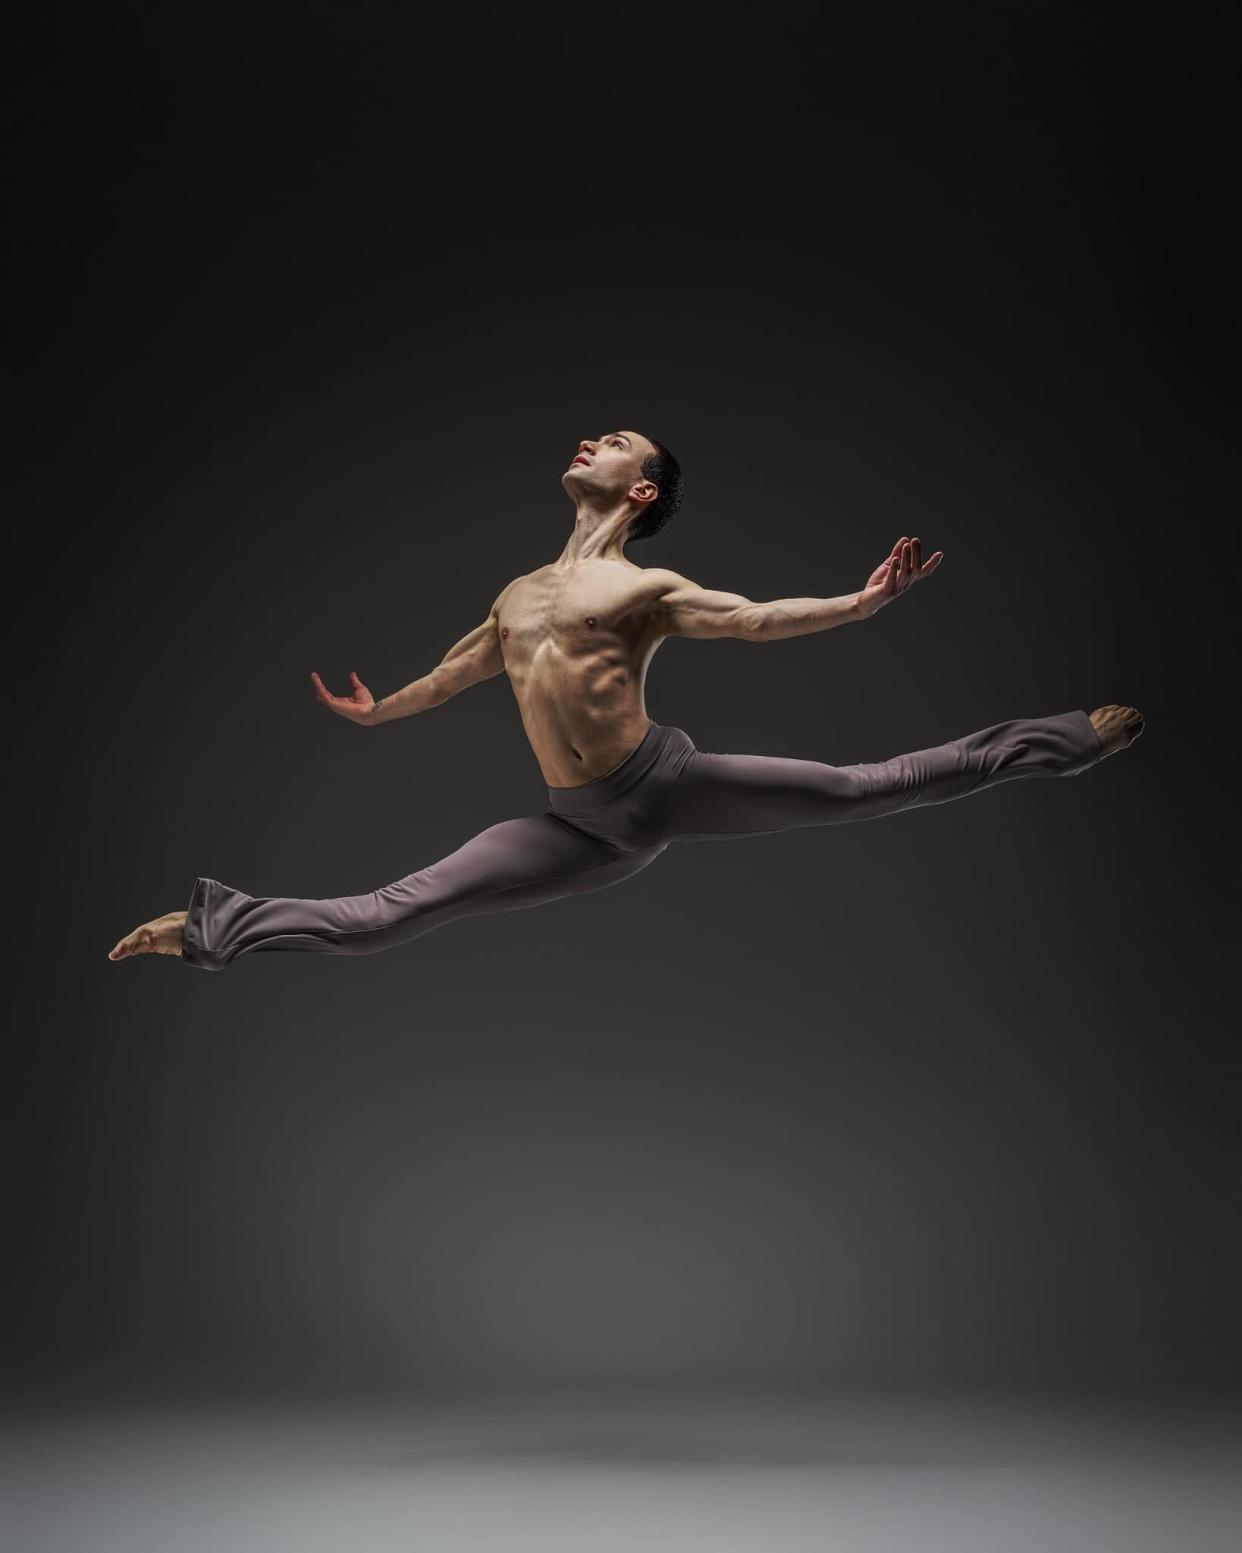 Luca Sportelli will be the guest artist dancing the male lead in a ballet choreographed by Zachary Catazaro. The piece will be performed with the Canton Ballet this weekend during "Come Dance with Me!"